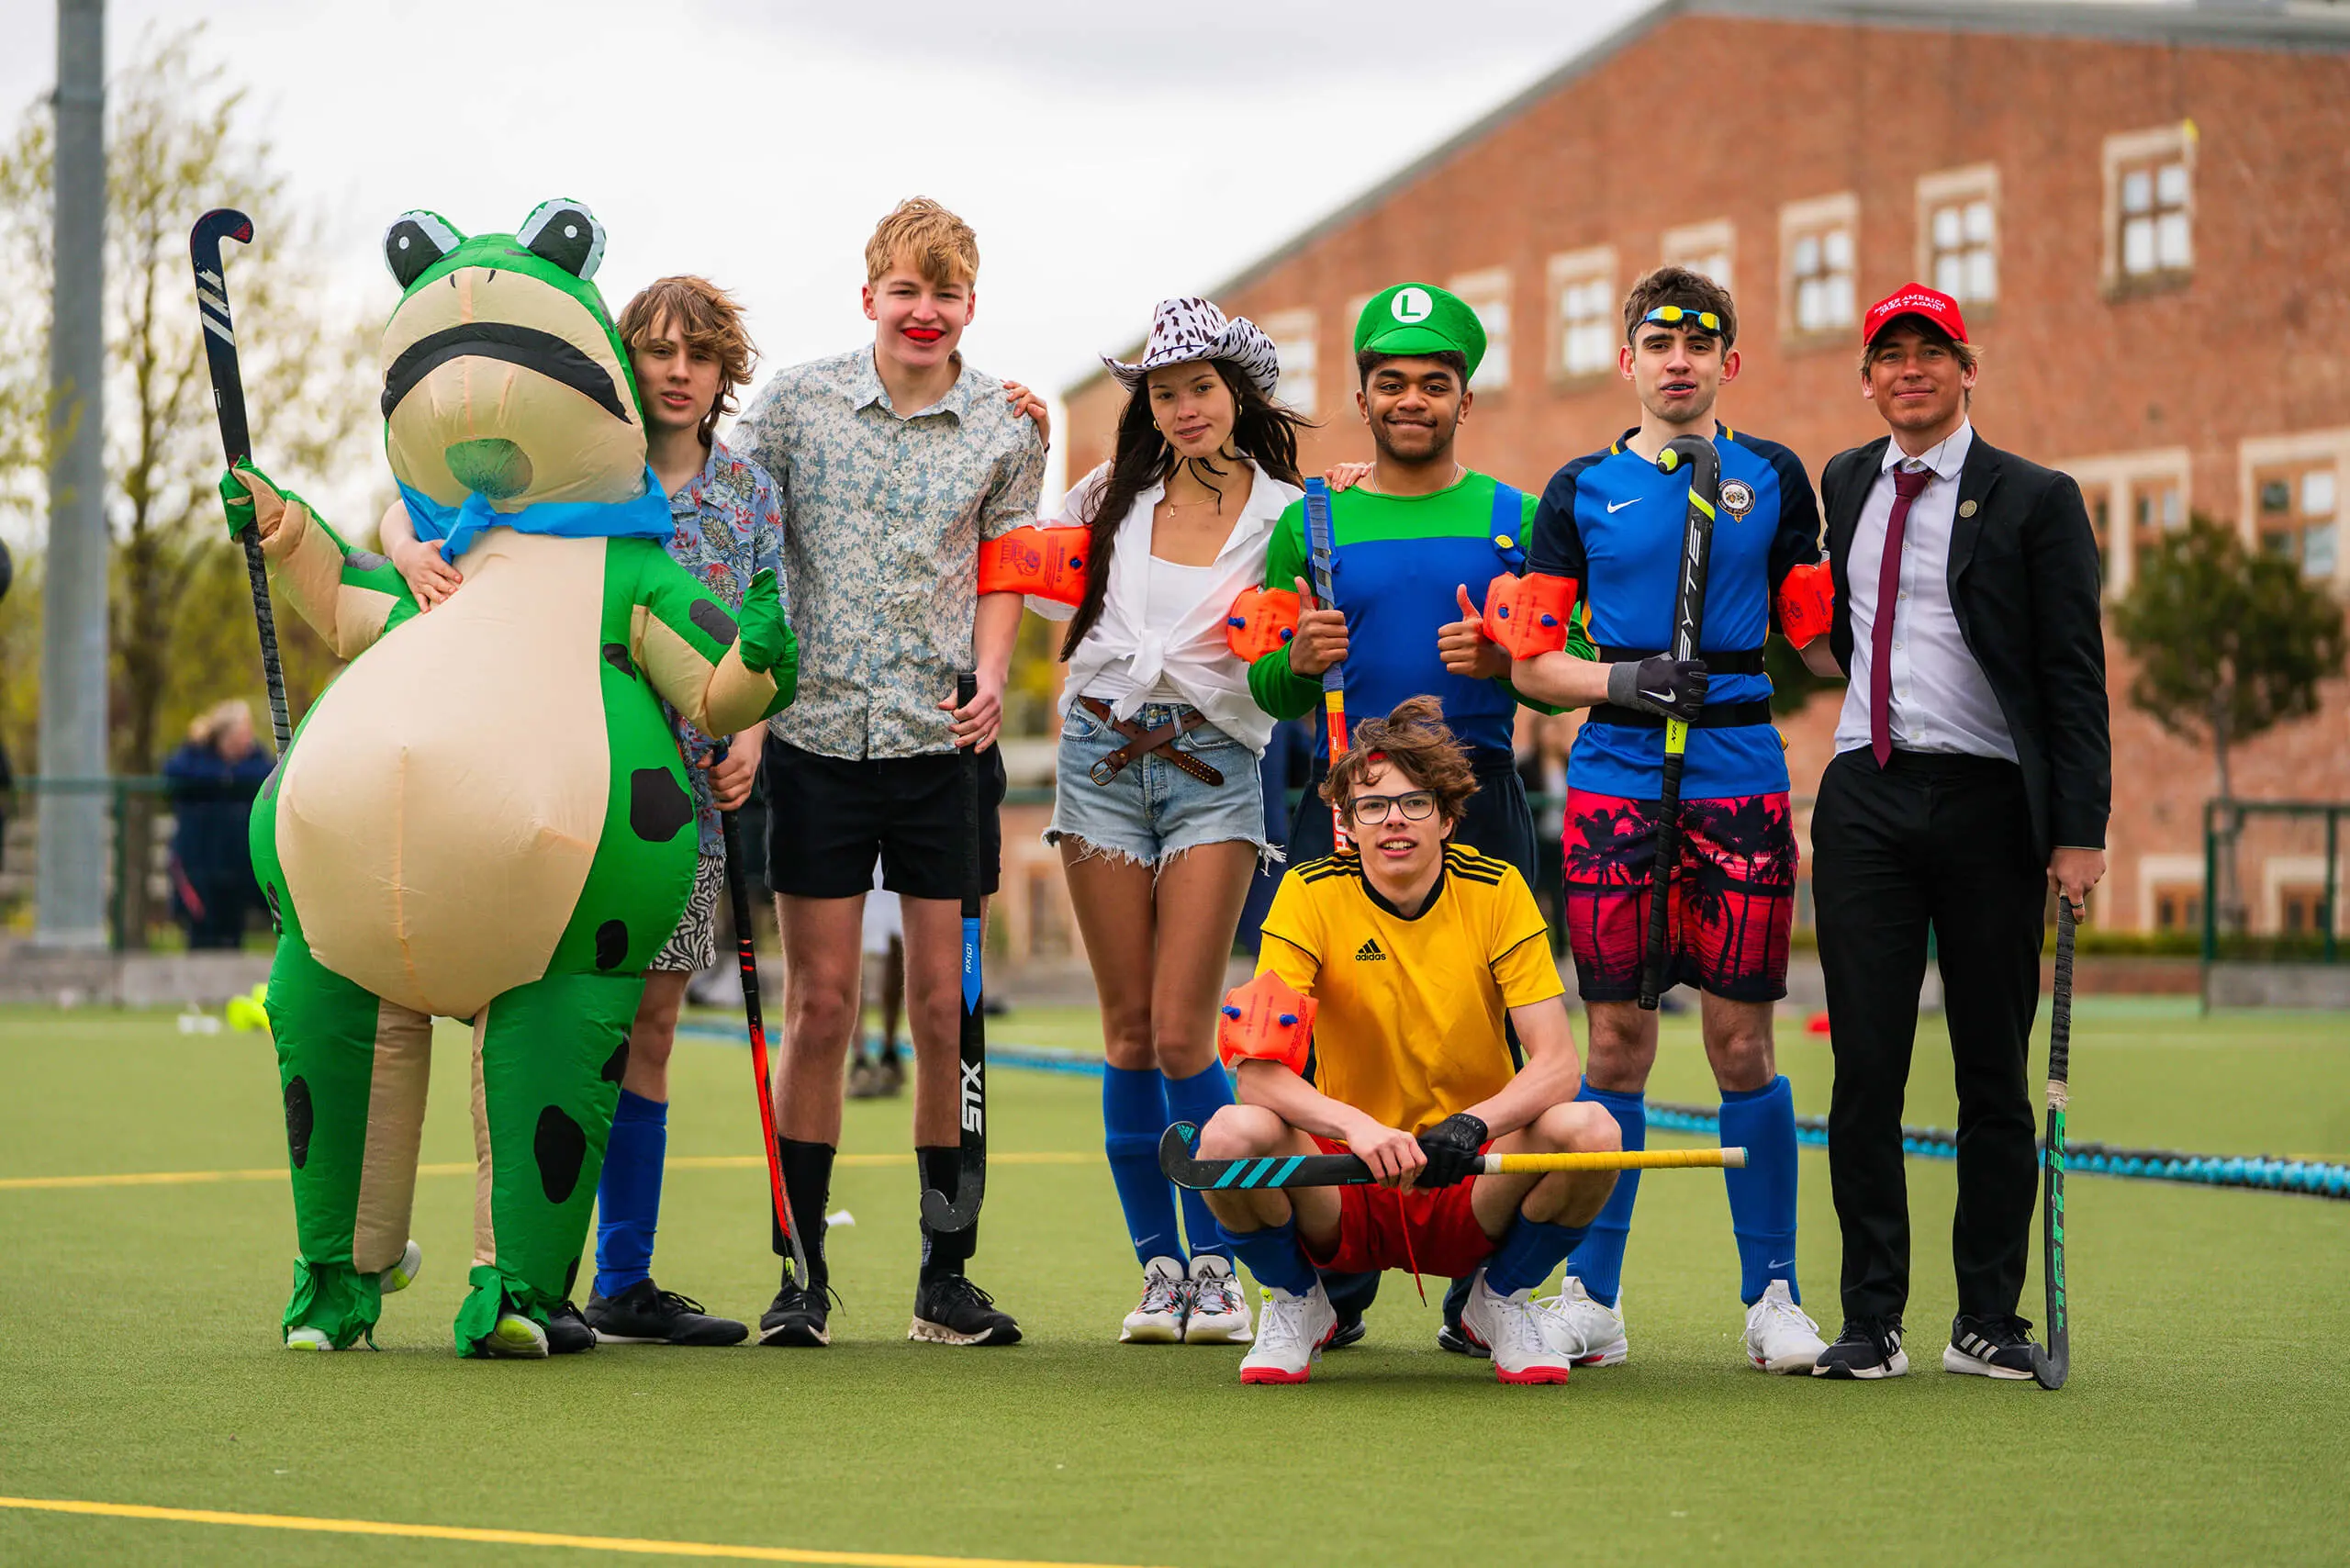 Queen Ethelburga's students competing in a fancy dress hockey match.